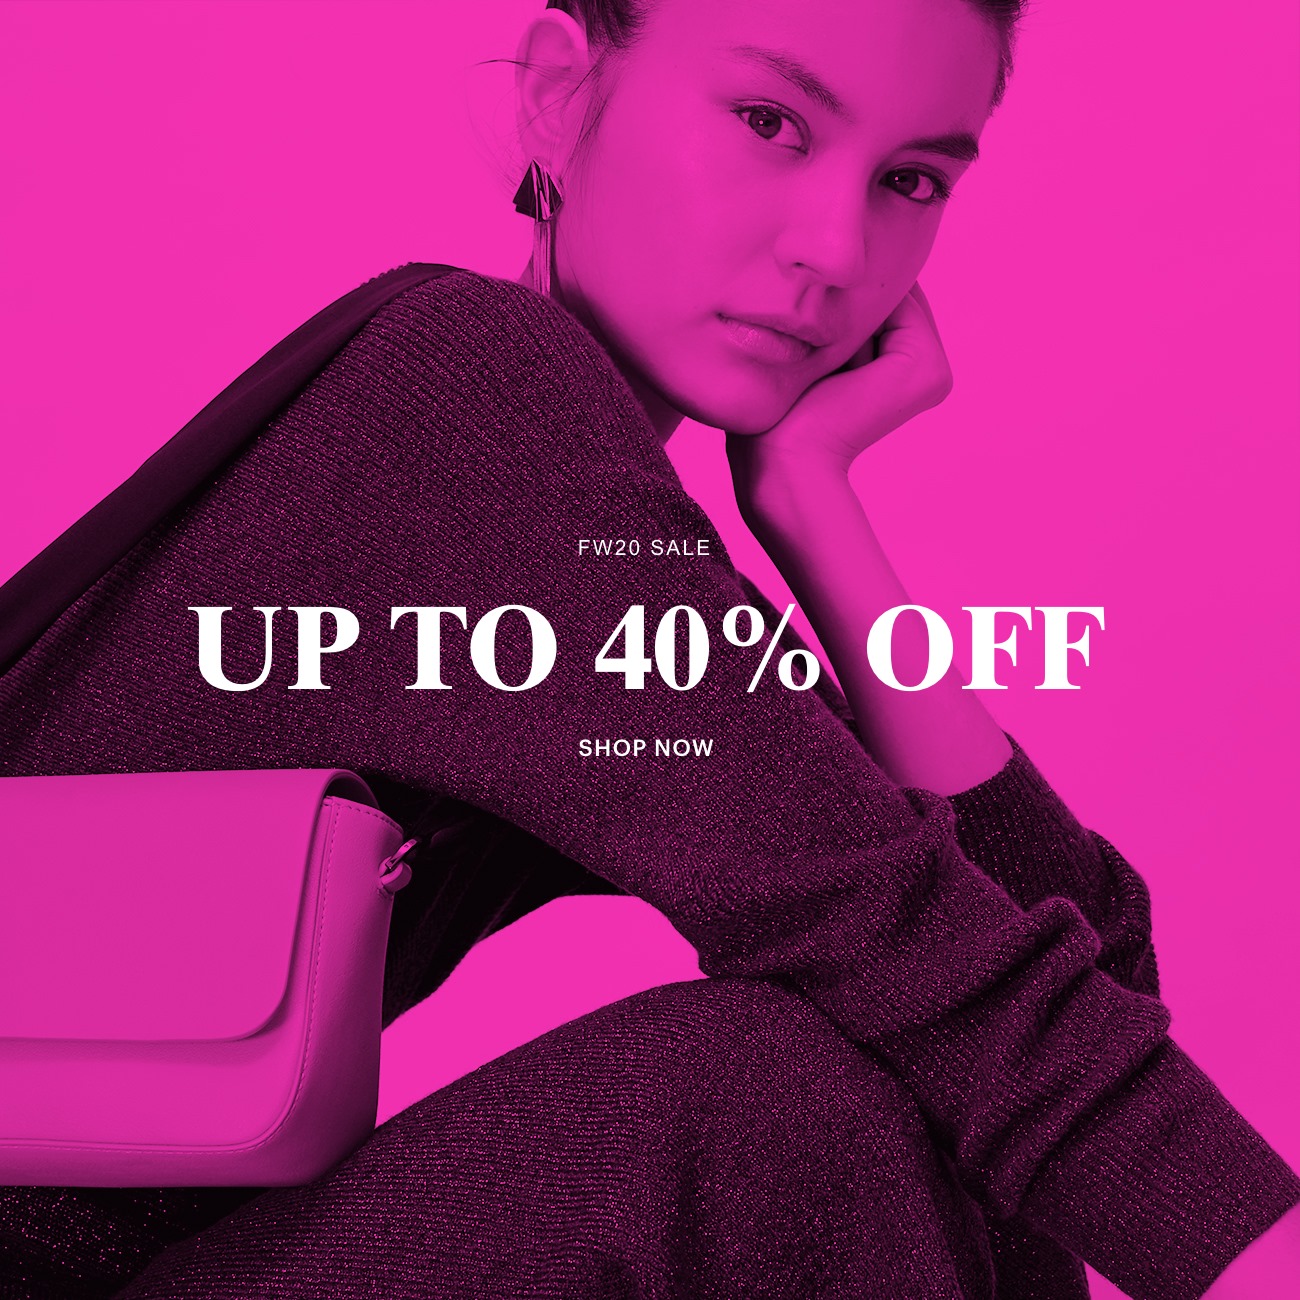 The sale is on now, in store and online.